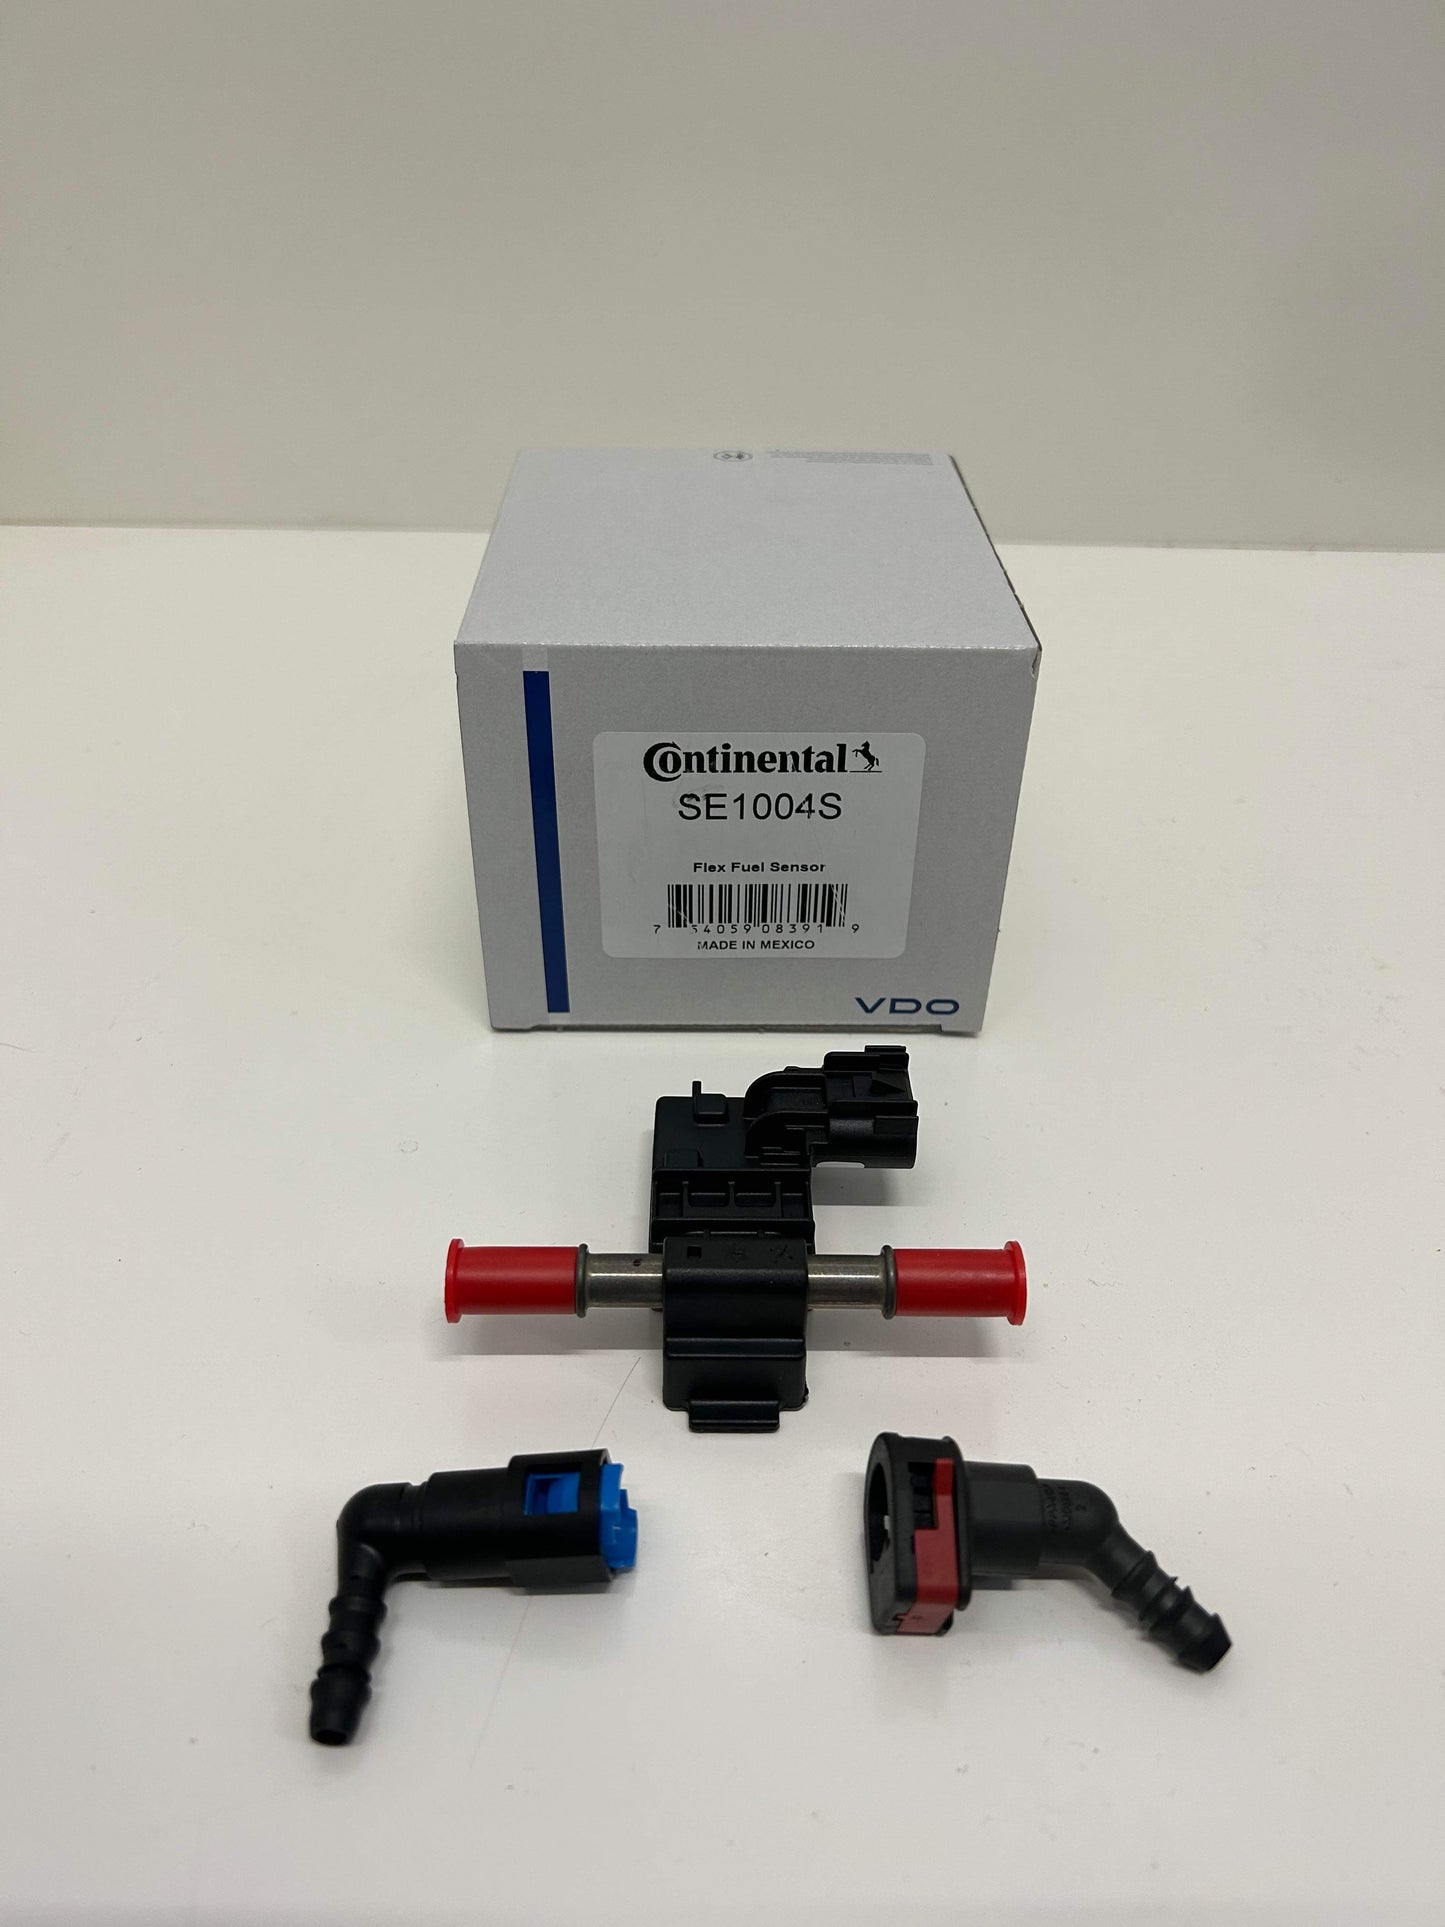 VDO Continental Flex Fuel Sensor w/ quick connect fittings and connector